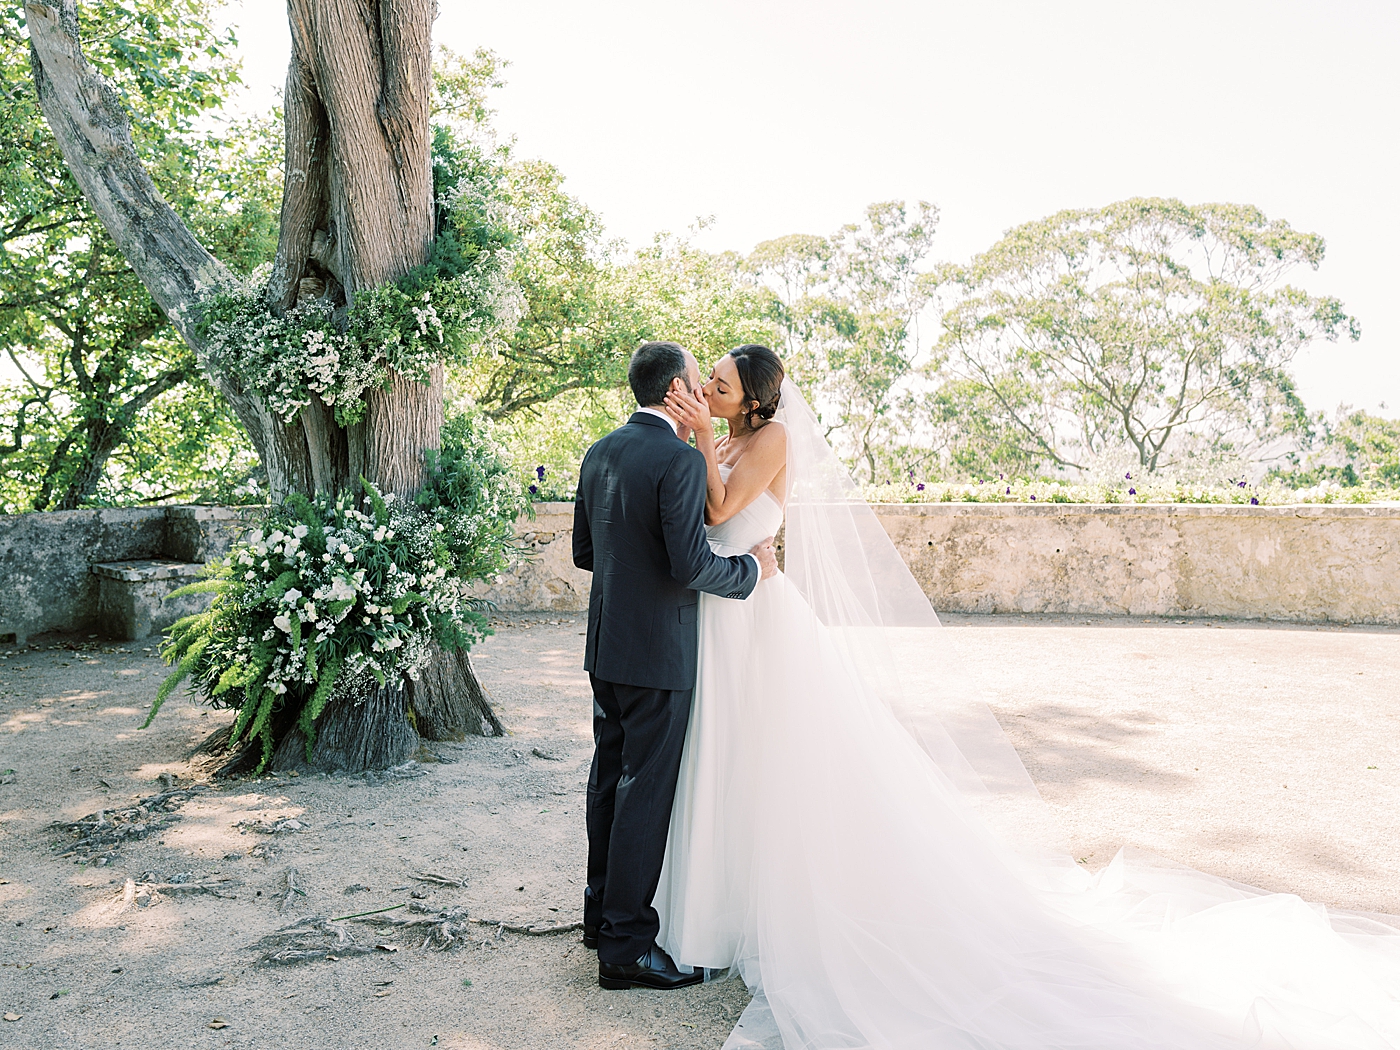 Bride and groom sharing their first kiss | Image by Diane Sotero Photography